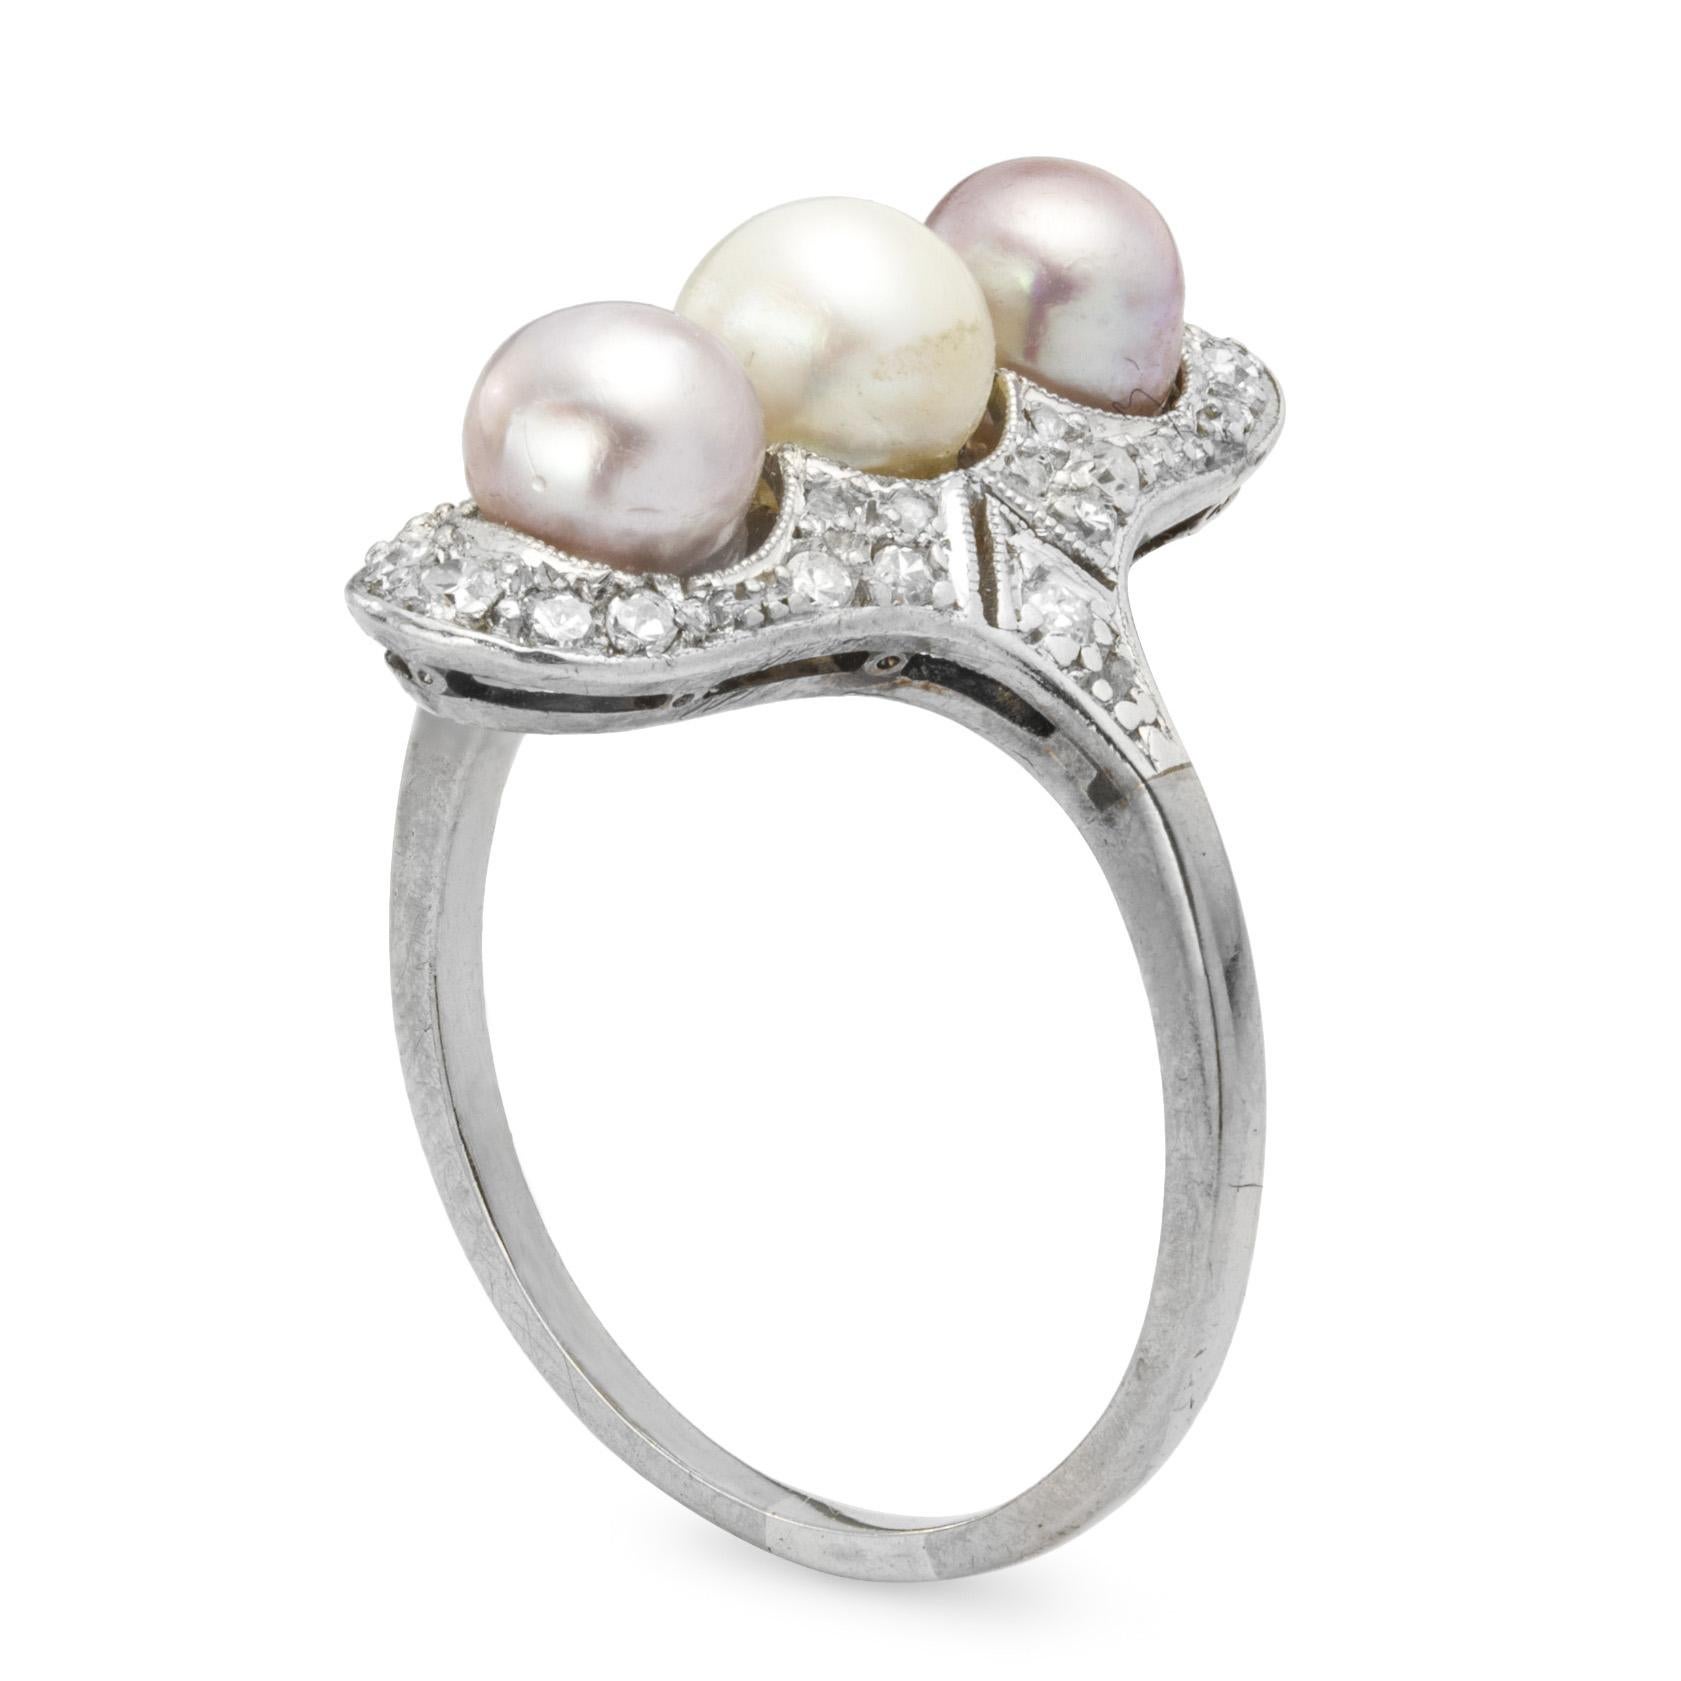 A turn of the century pearl and diamond tablet ring, set vertically with three round pearls of different colours to the centre of an openwork old brilliant-cut diamond-set surround, circa 1900, head measuring 2.2x1.2cm, gross weight 5.1 grams.